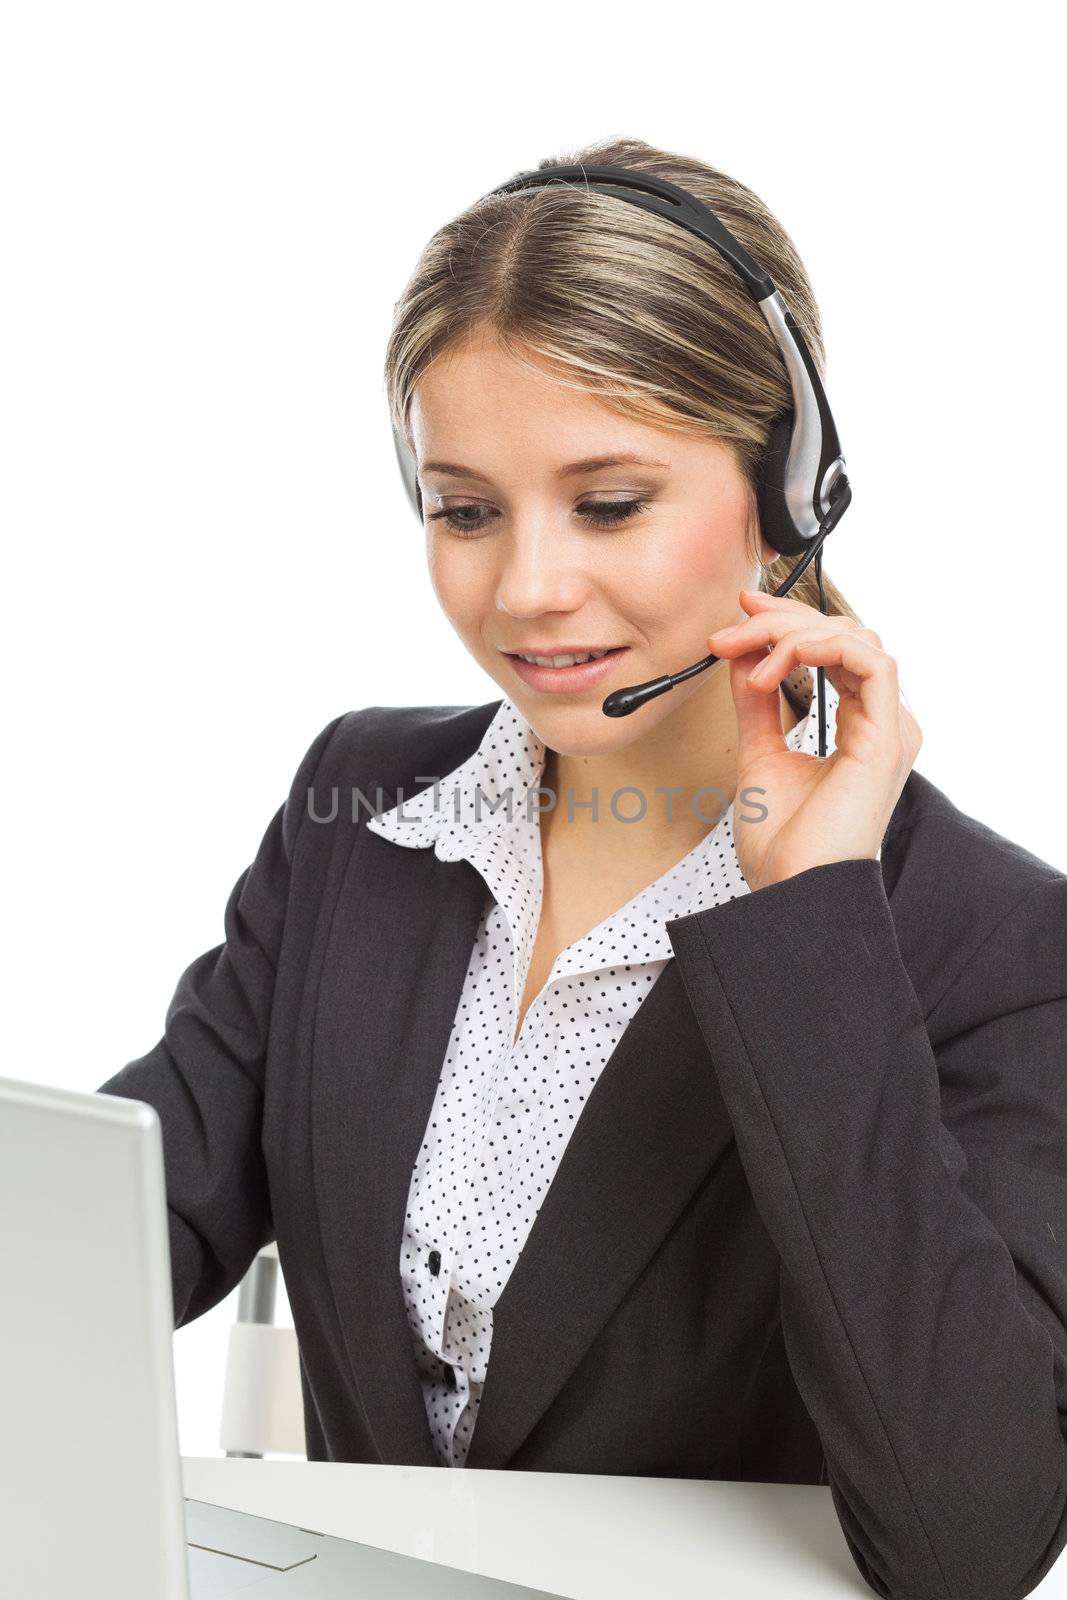 Beautiful young woman with headphones and laptop illustrating business service, on white